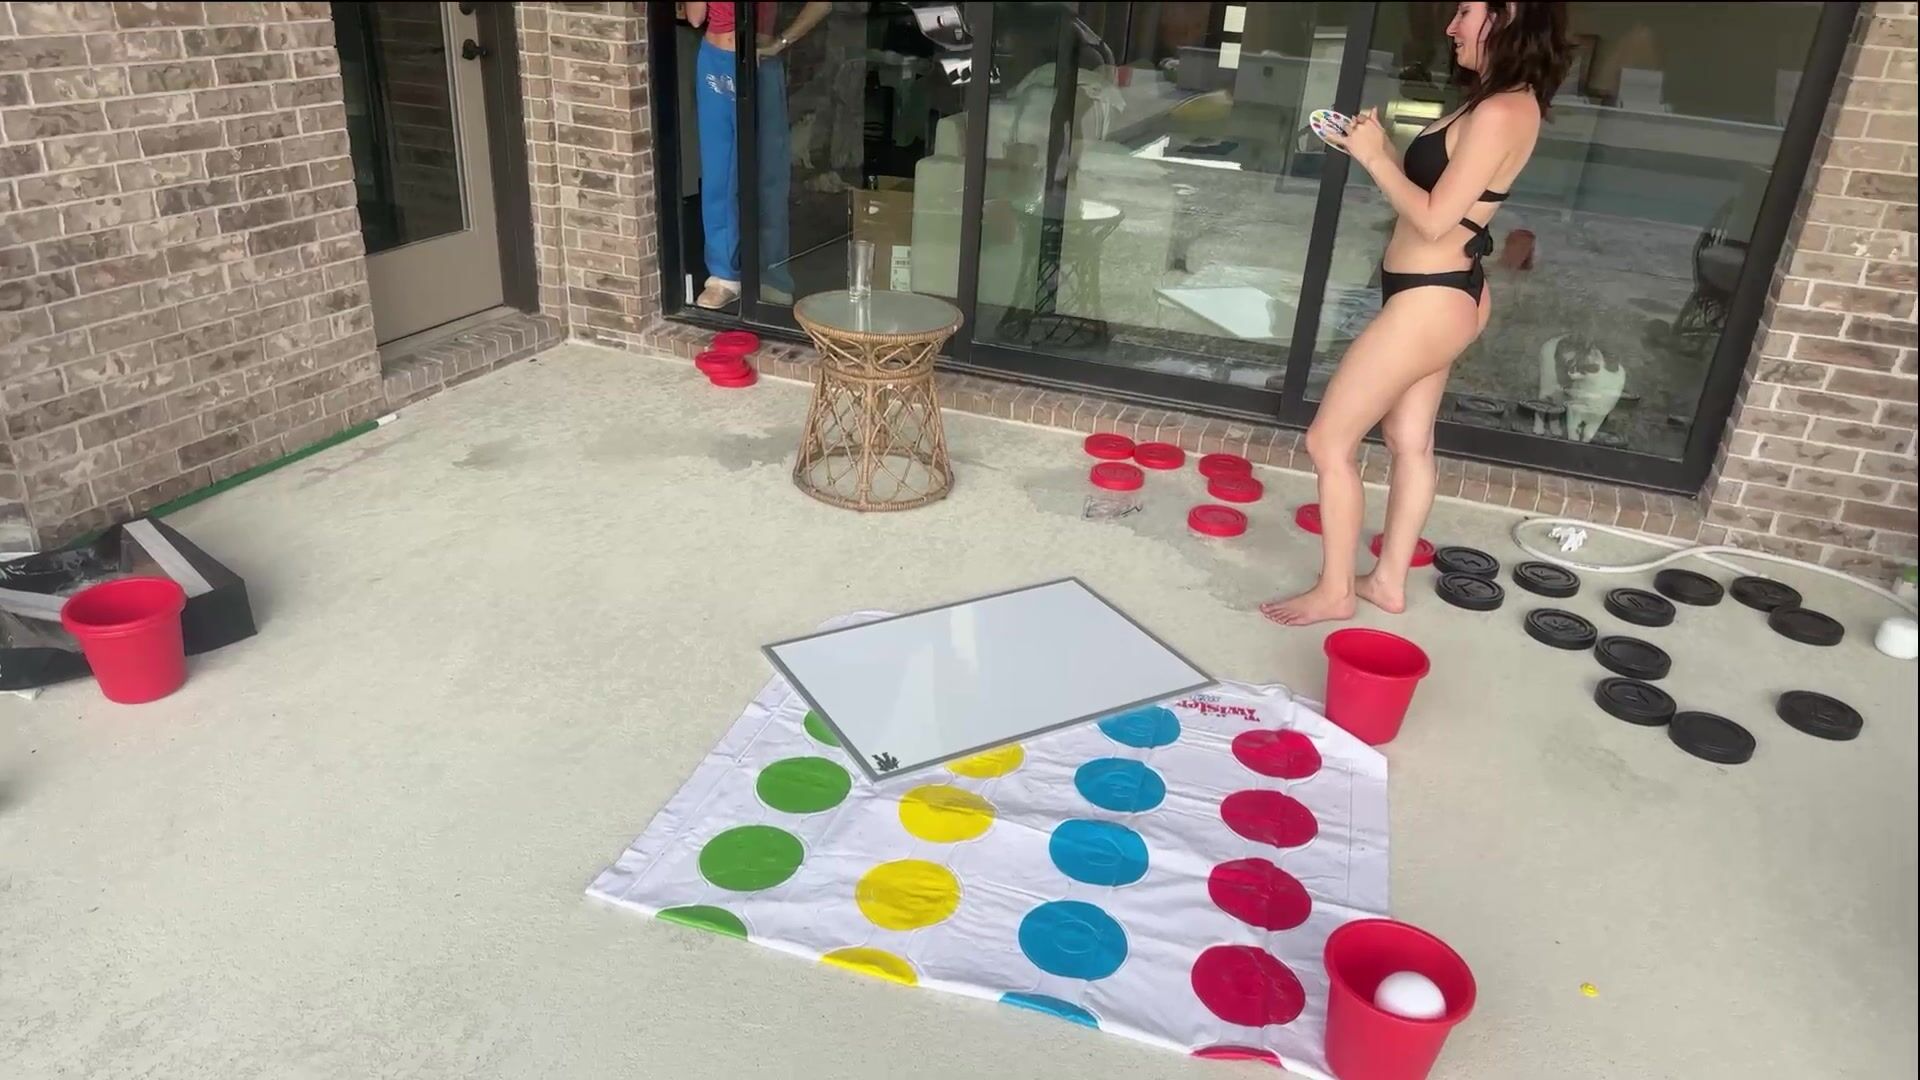 Alinity with fandy - Beer pong and twister at the pool